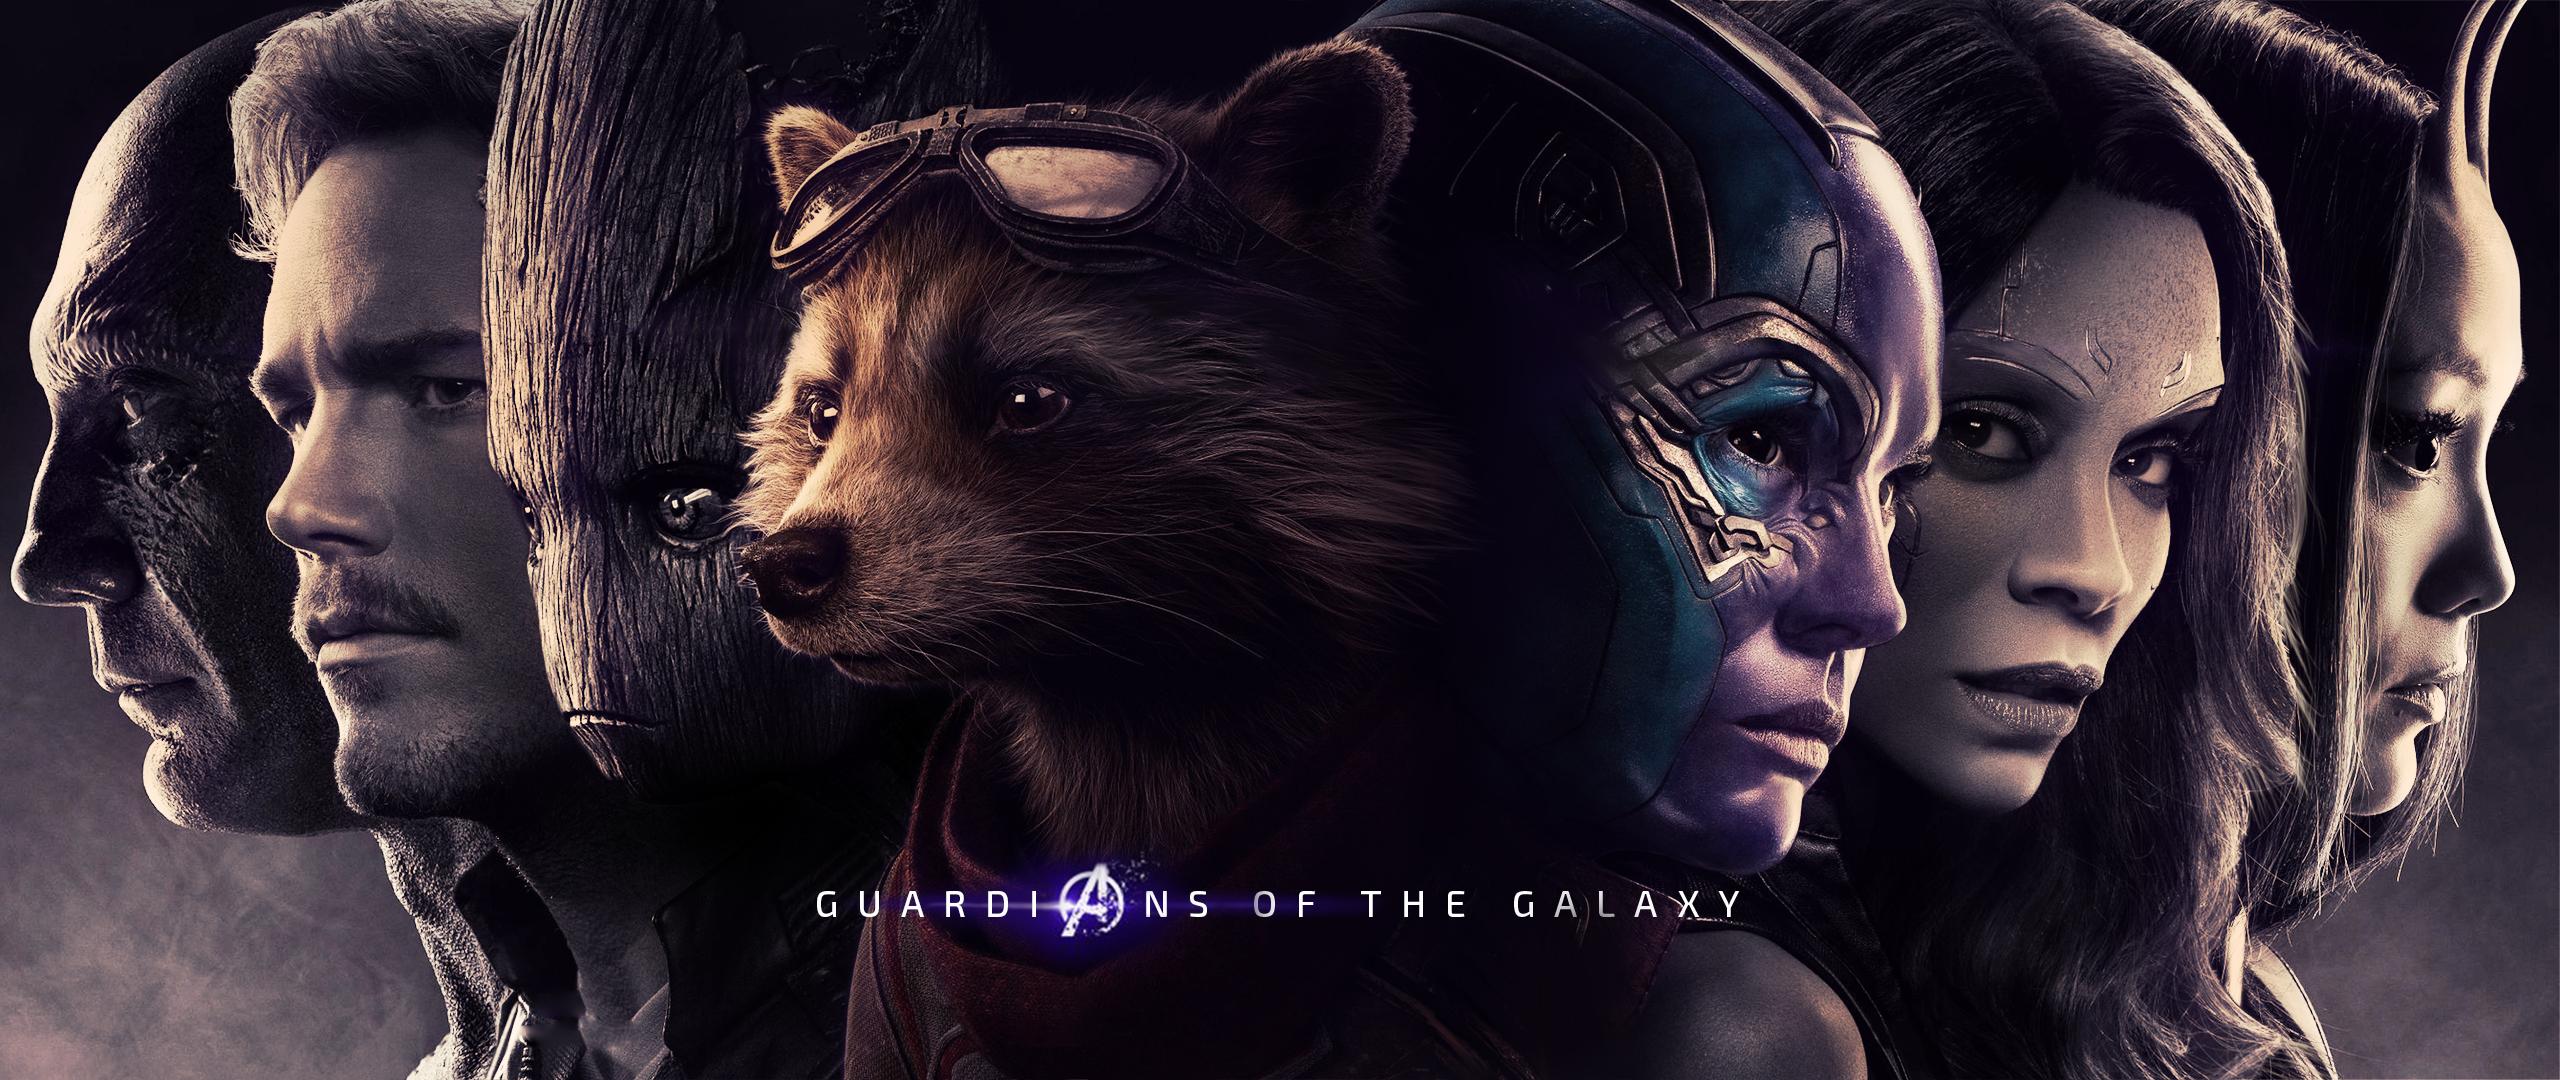 Guardians Of The Galaxy Endgame - HD Wallpaper 